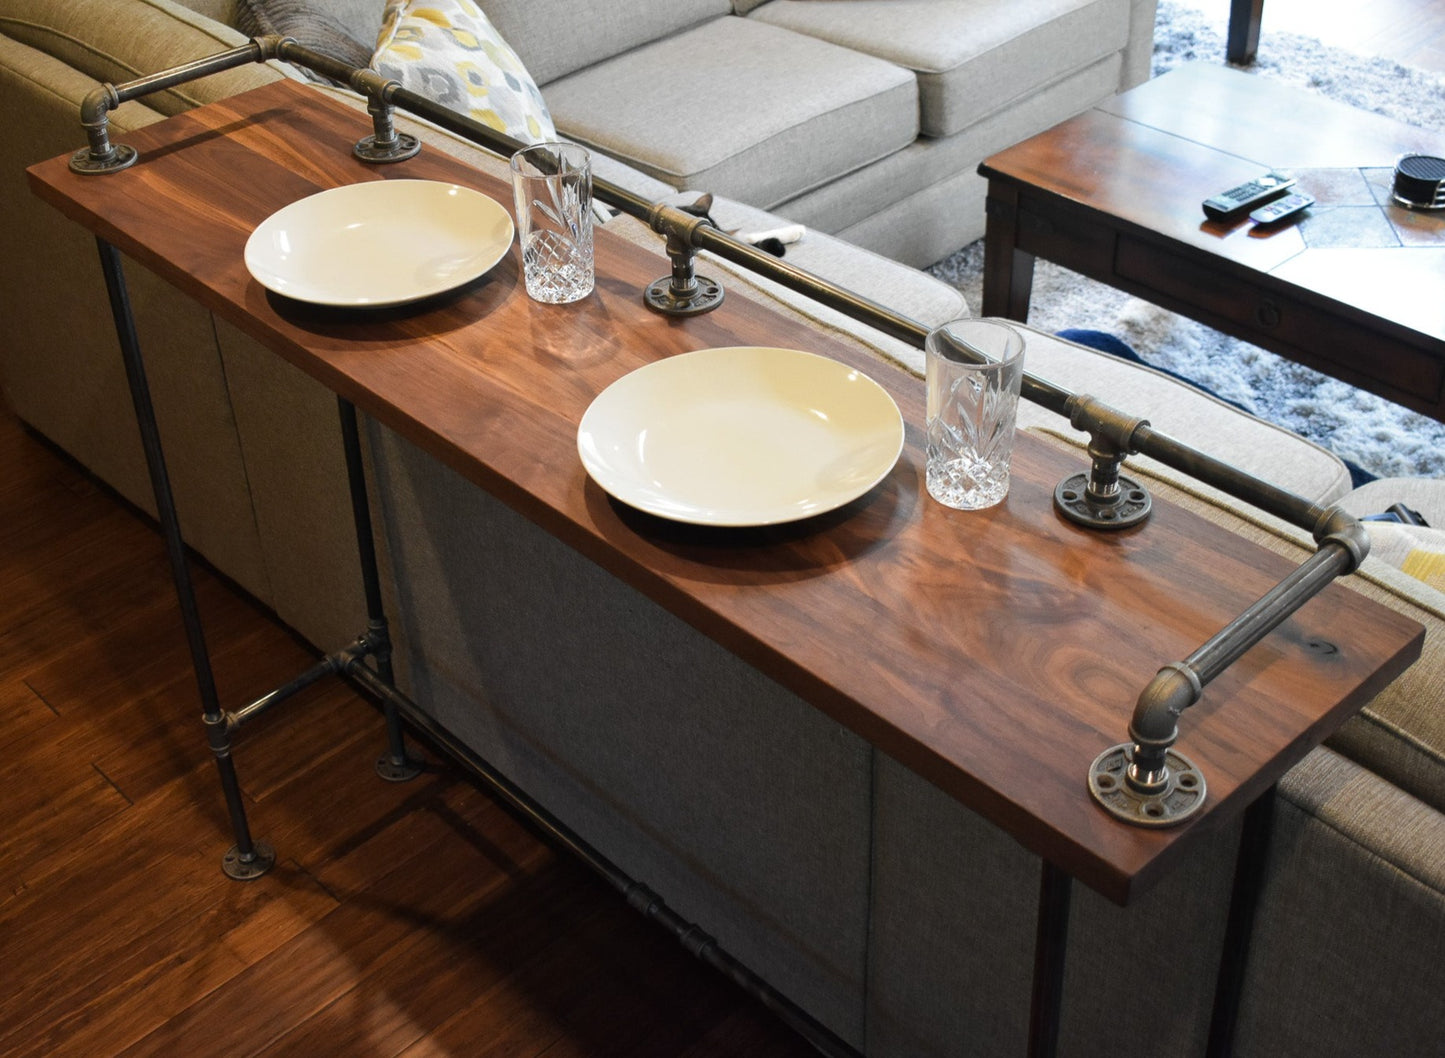 HARDWOOD WALNUT BAR TABLE BEHIND A GRAY SOFA, TWO WHITE DIINER PLATES AND TWO CRYSTAL GLASS CUPS SIT ON THE TABLE - JT INDUSTRIAL DESIGNS HANDMADE FURNITURE